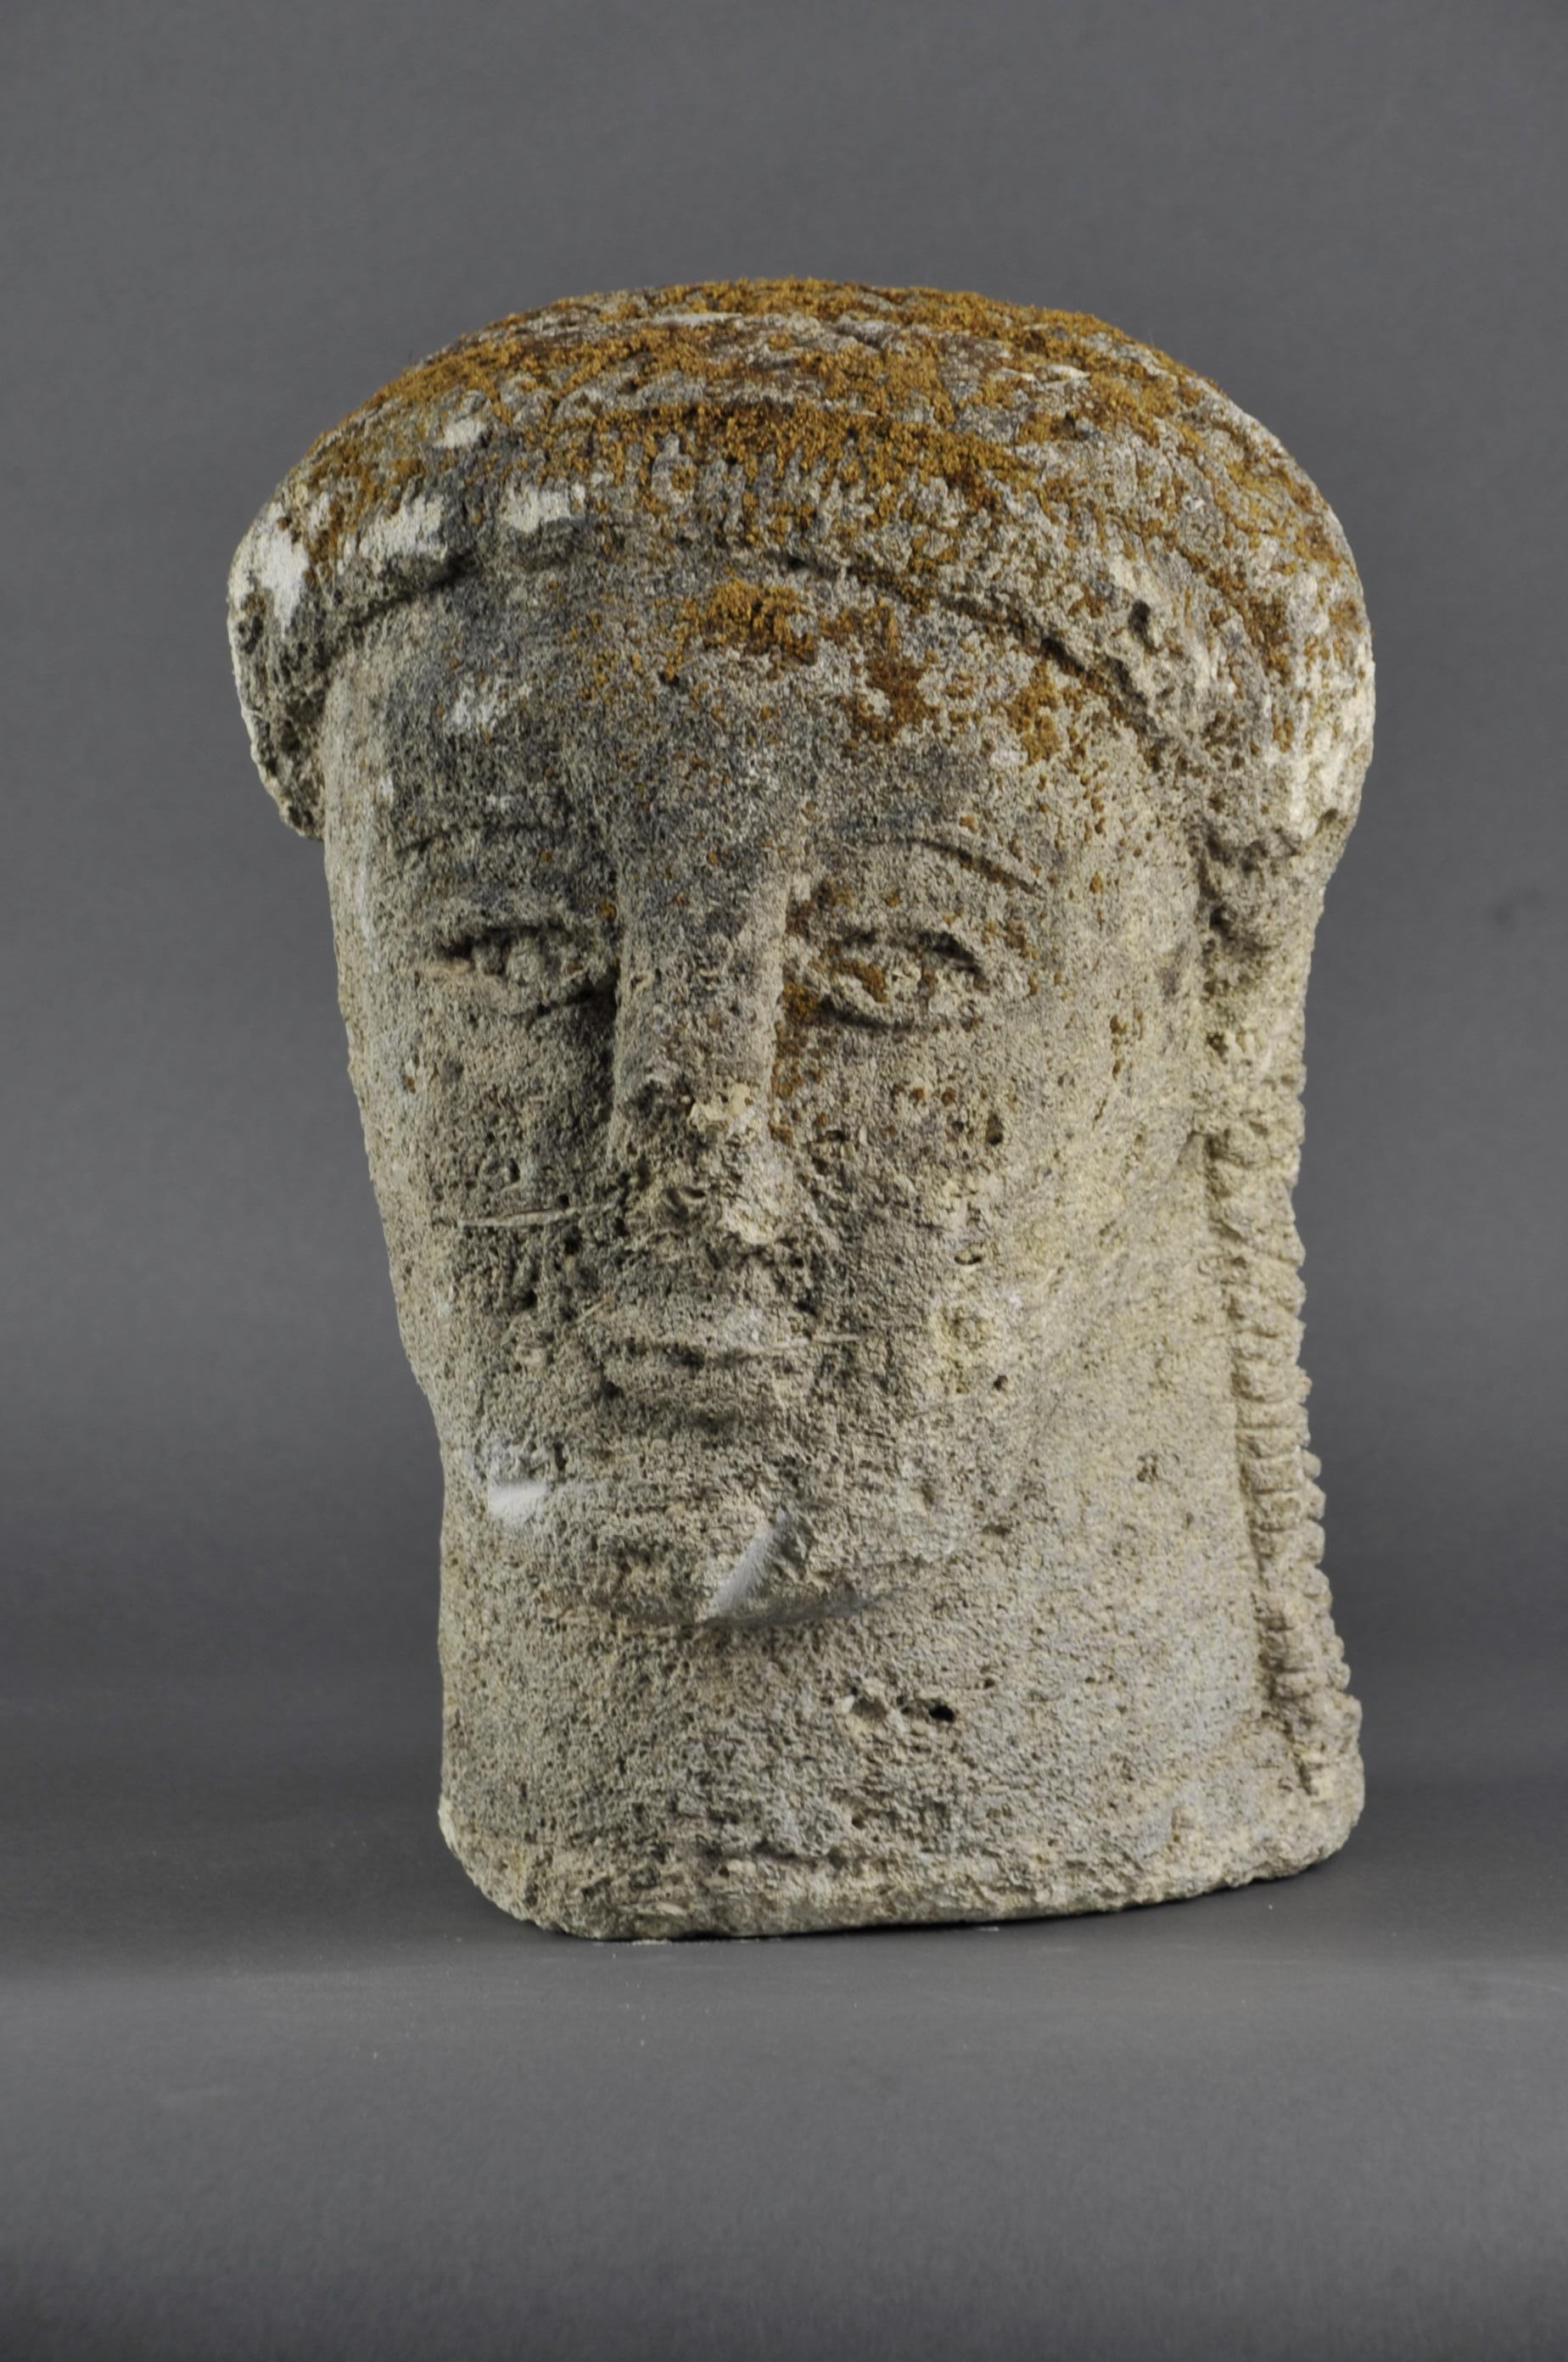 Soft limestone sculpture depicting a woman's head wearing a gorget-type headdress.

Religious work, possibly from medieval times. The fact that it is in soft stone implies an indoor location (in a church) otherwise it would not have withstood bad